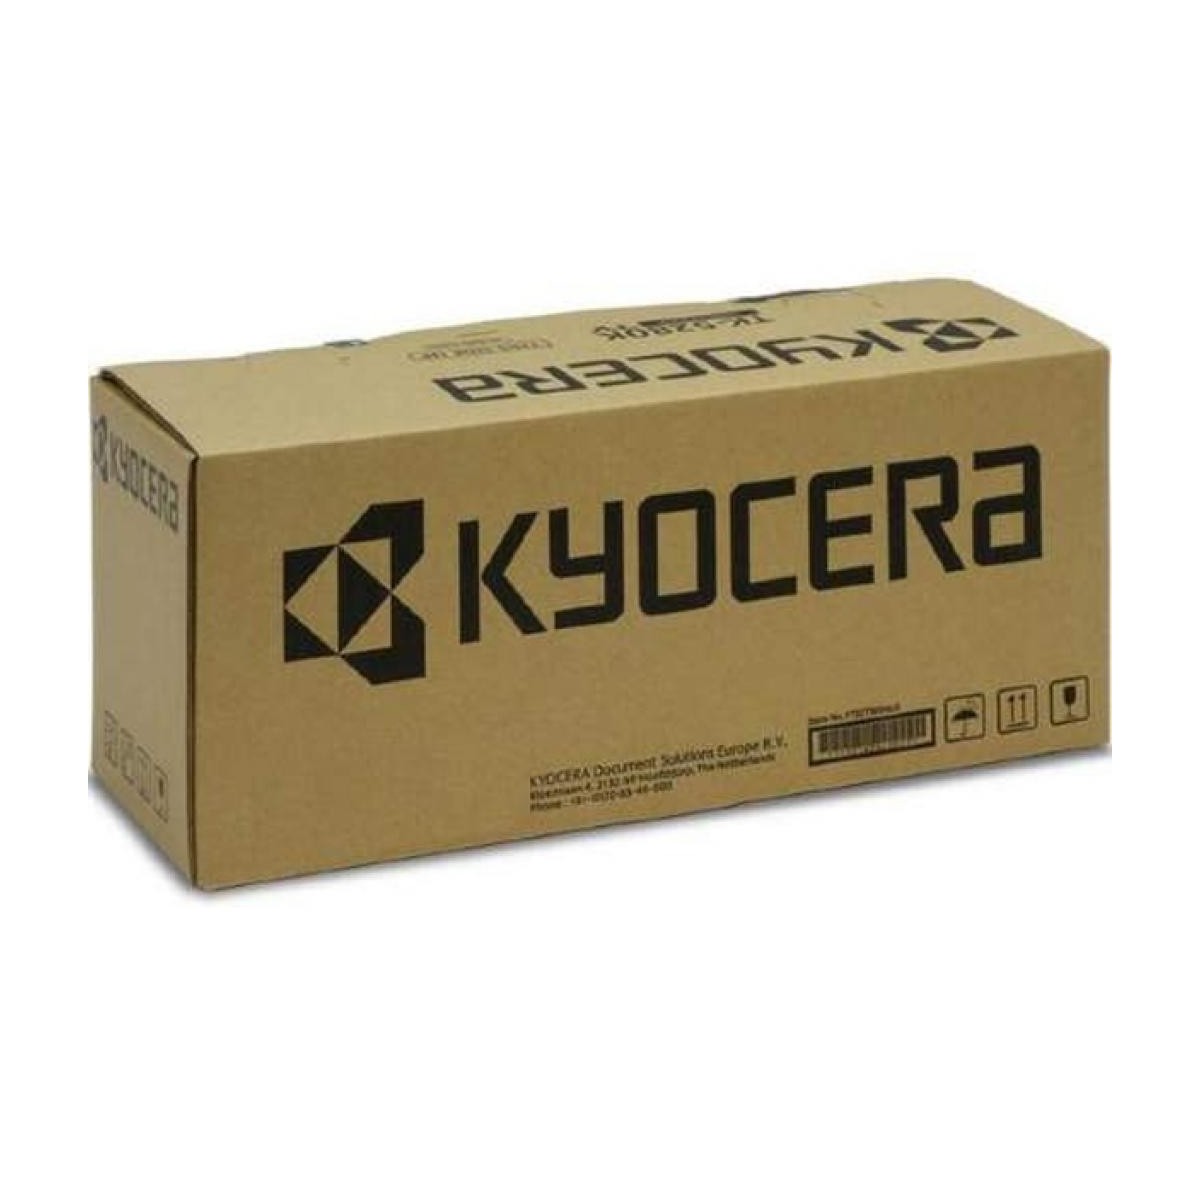 Kyocera FK-1150 - Laser - 100000 pages - Kyocera - P2040dn,P2040dw,P2235dn - P2235dw,M2040dn,M2540dn - M2540dw,M2135dn,M2635dn,M